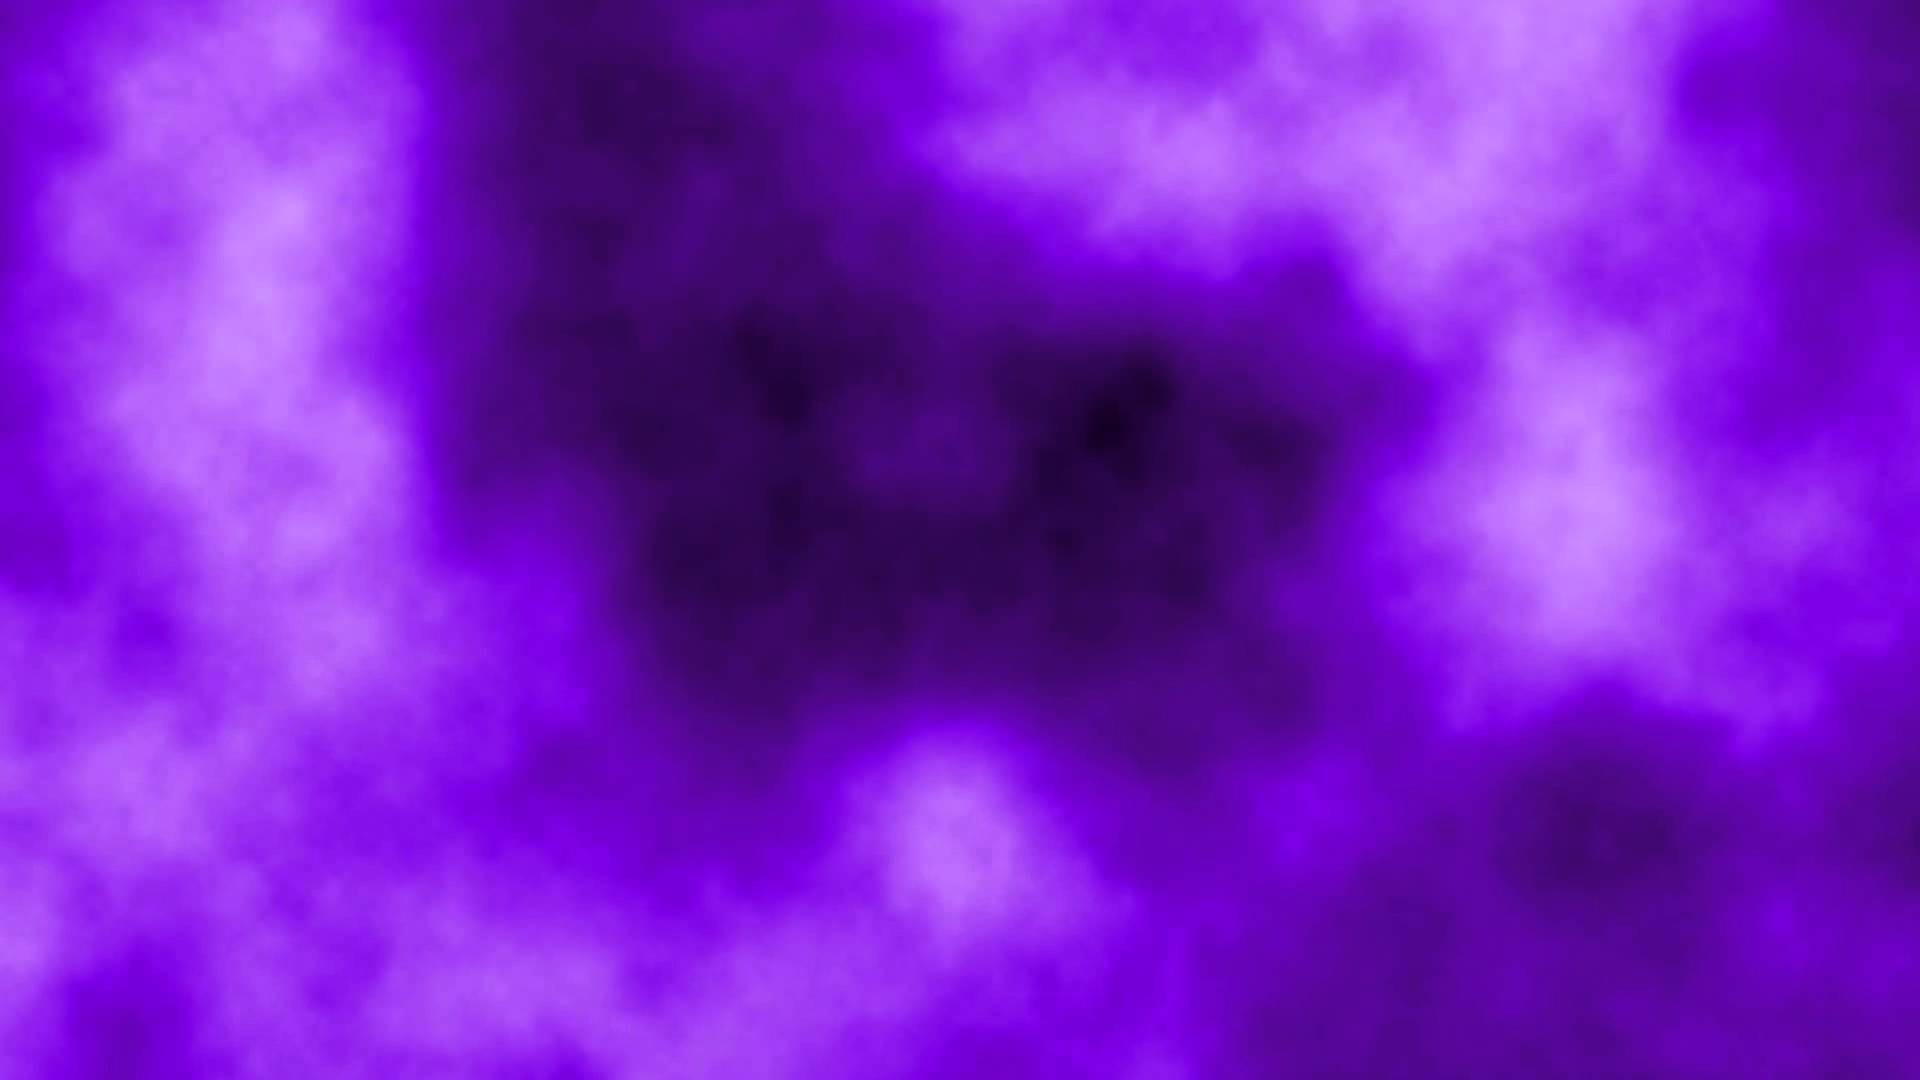 Blue and Purple Backgrounds (65+ images)